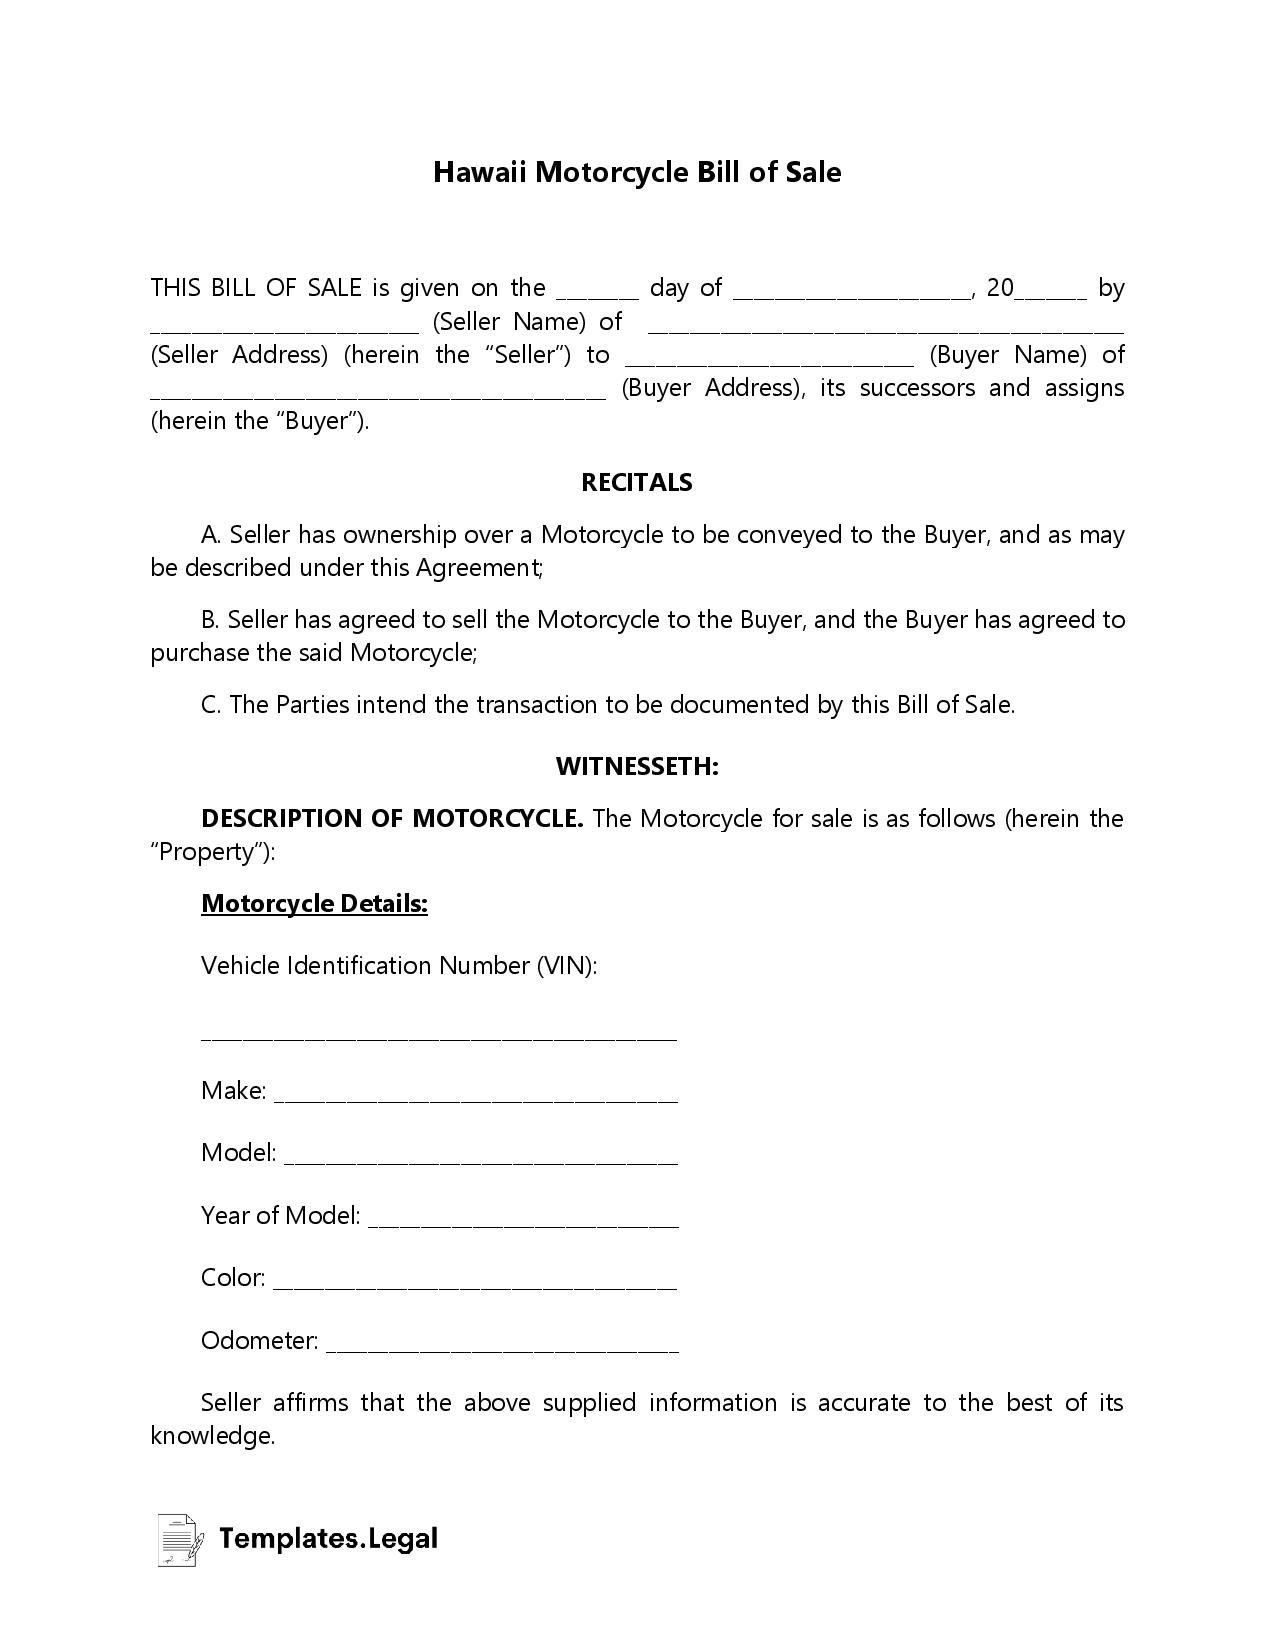 Hawaii Motorcycle Bill of Sale - Templates.Legal